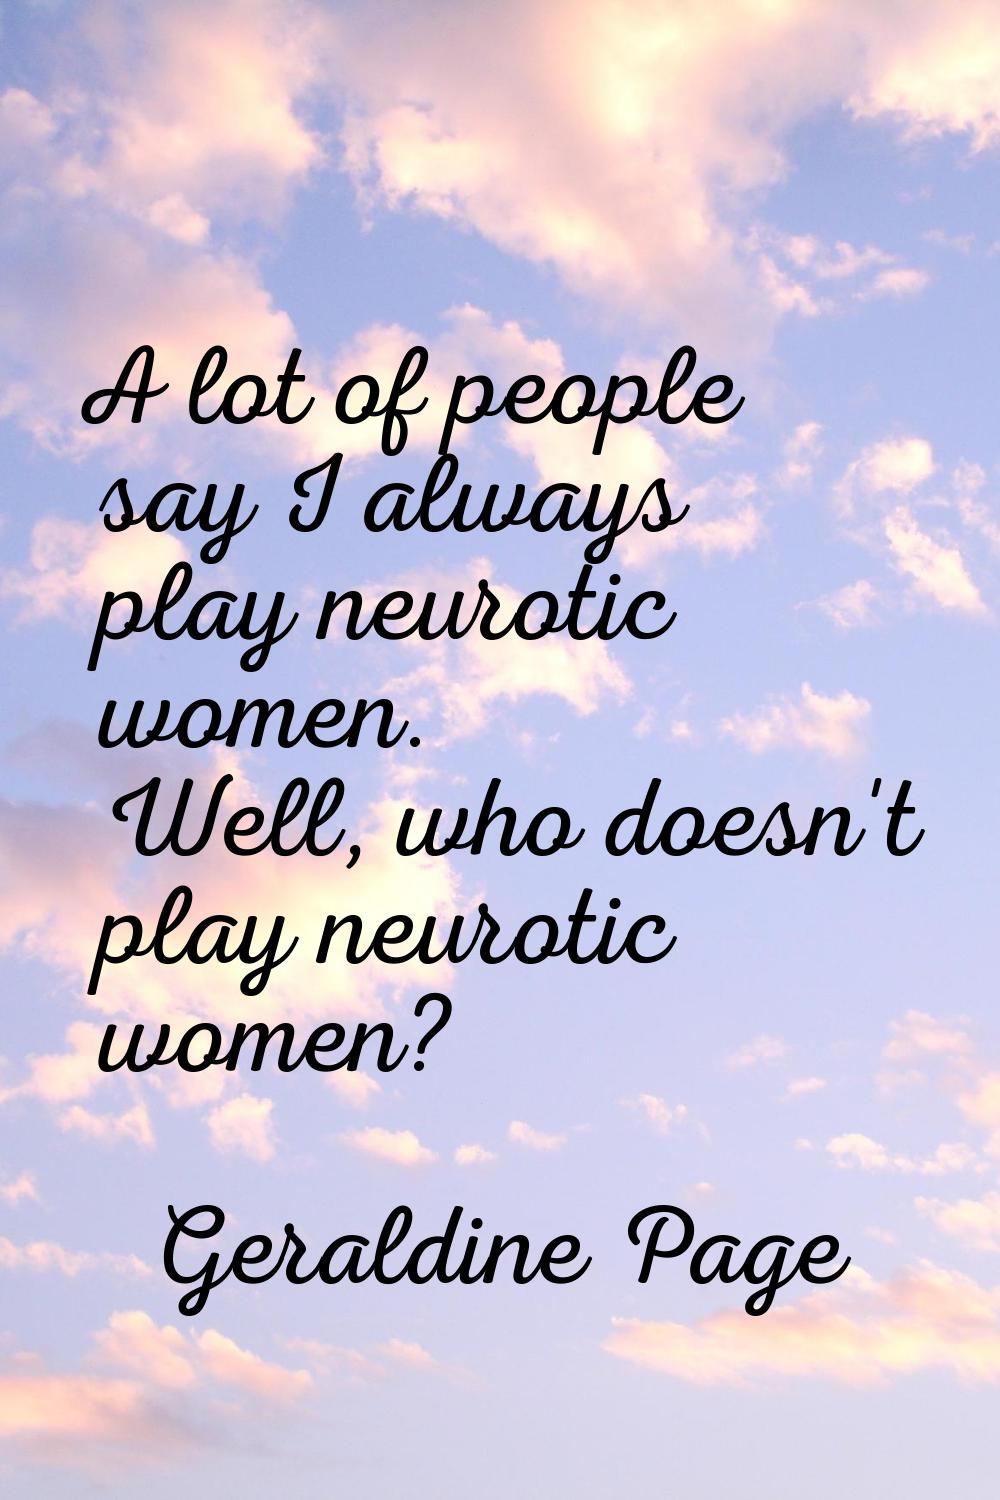 A lot of people say I always play neurotic women. Well, who doesn't play neurotic women?